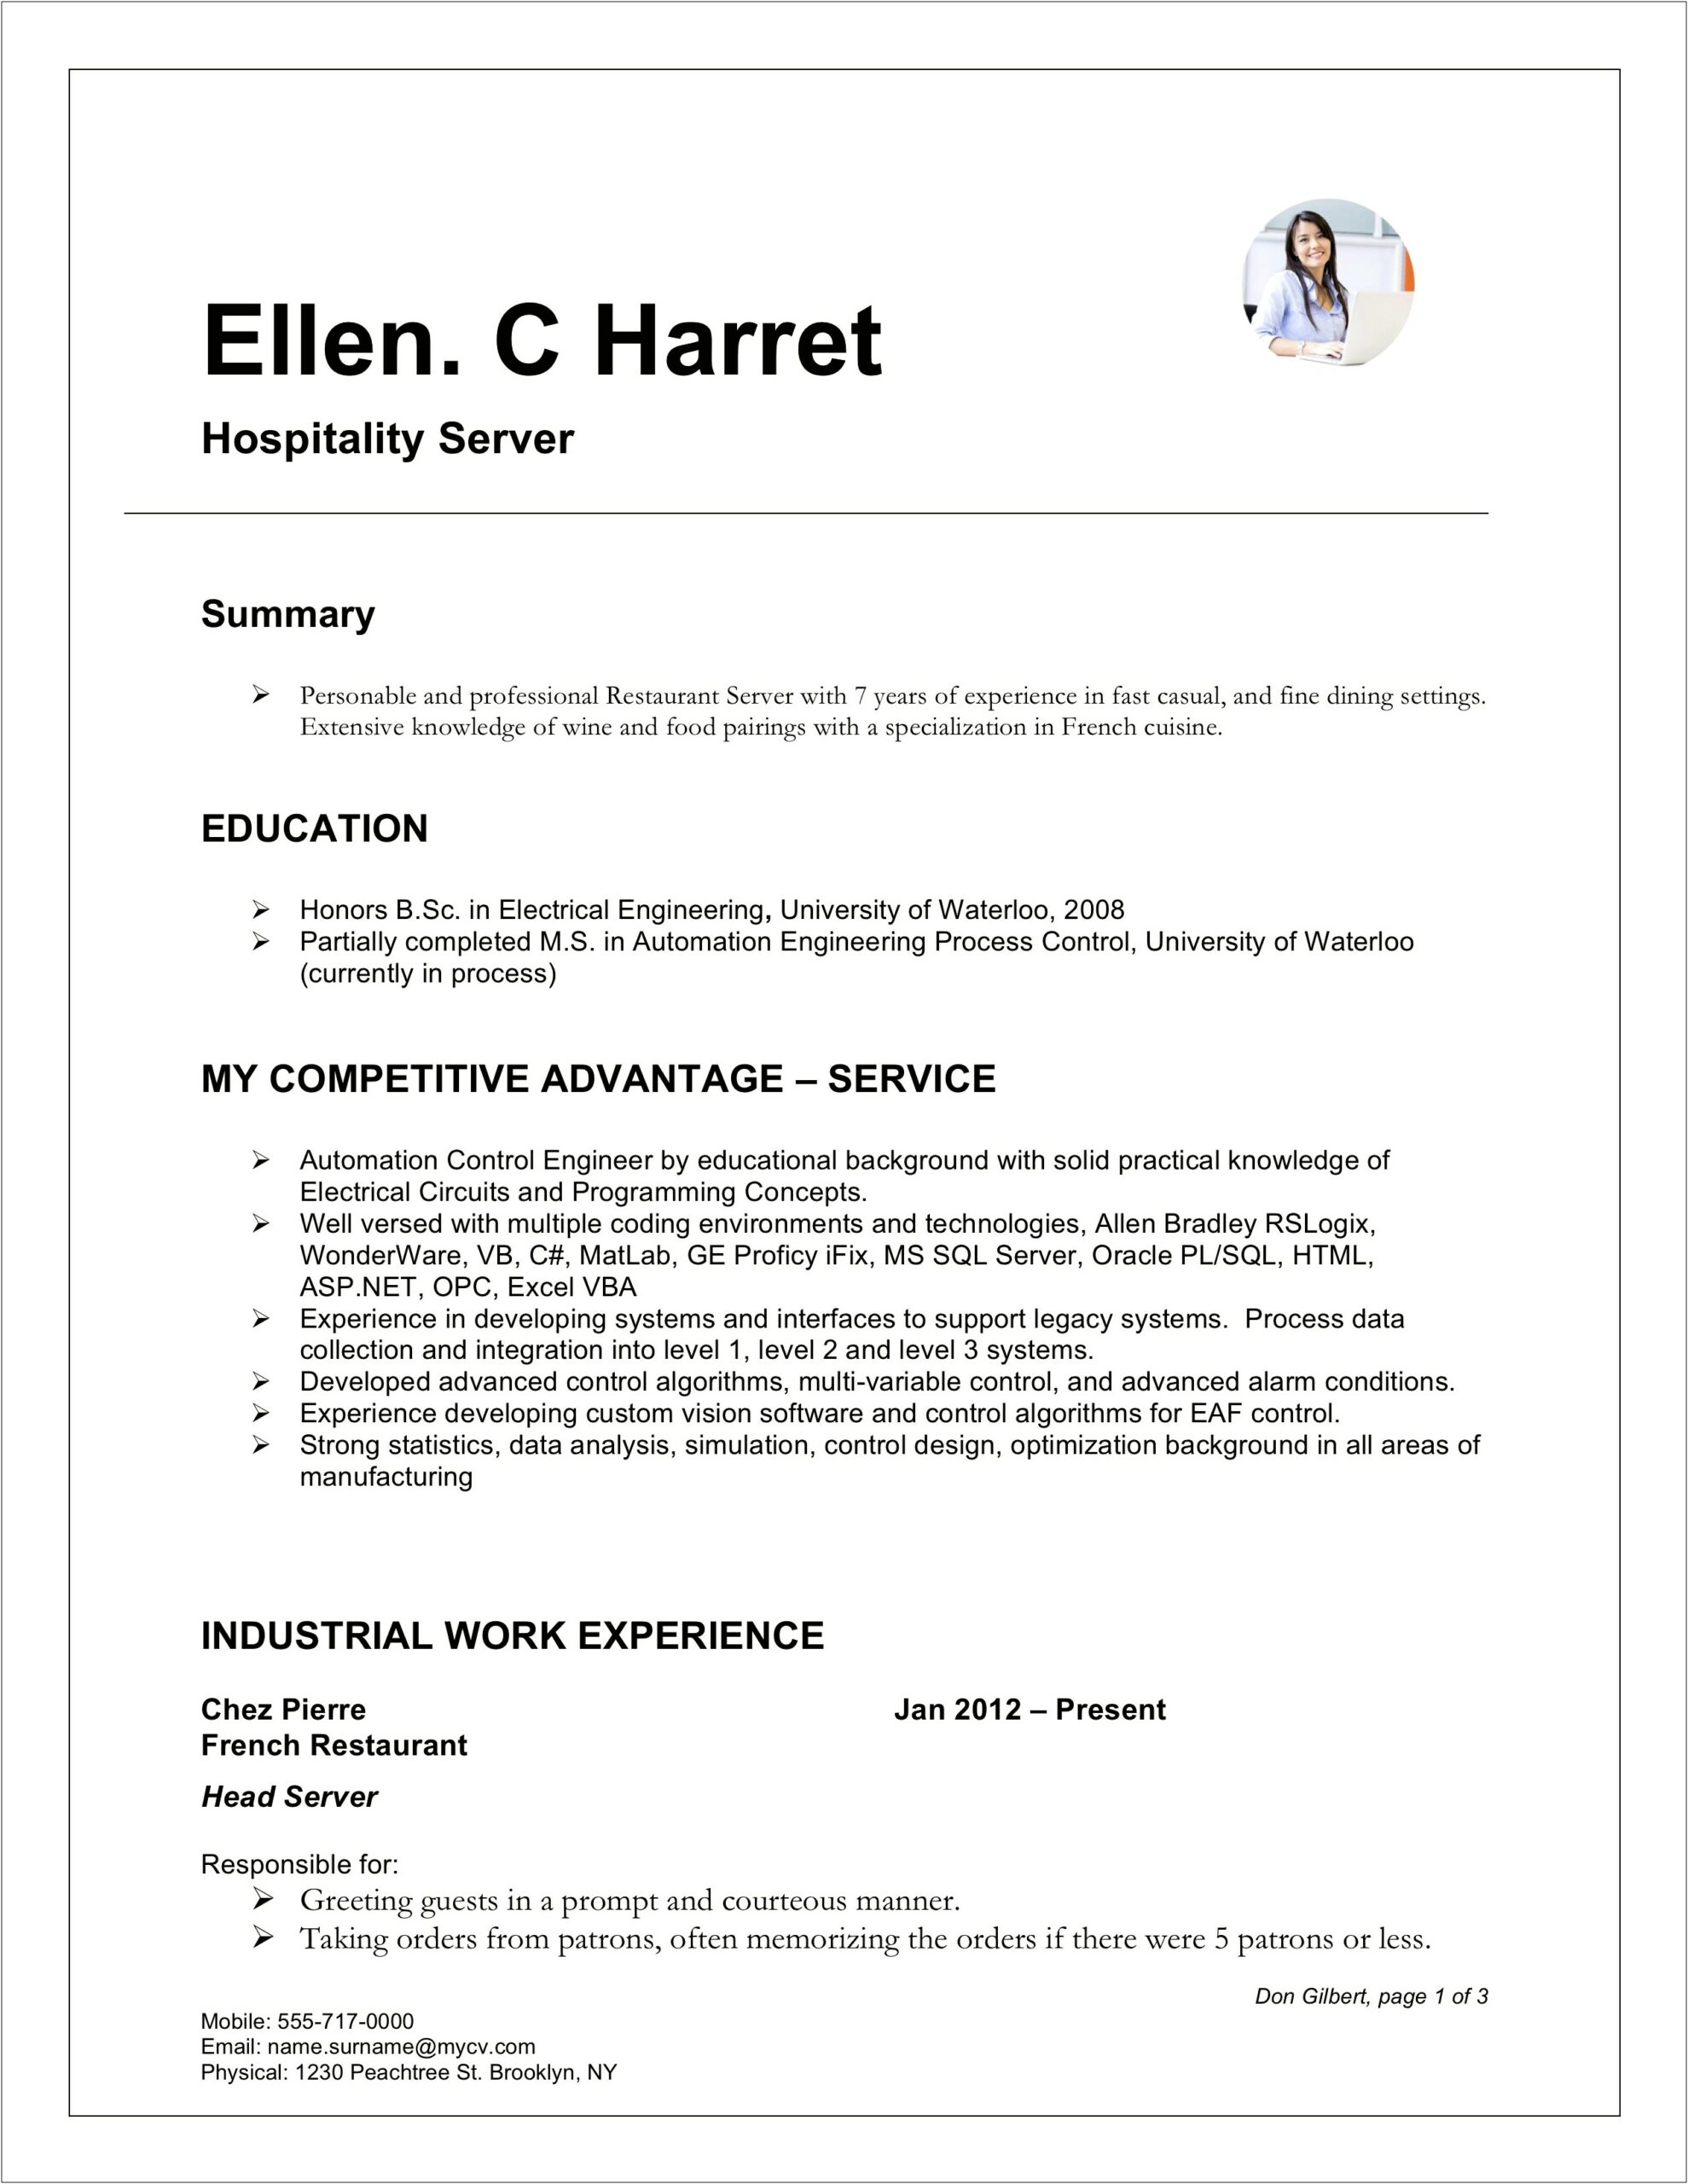 Restaurant Work Experience On A Resume